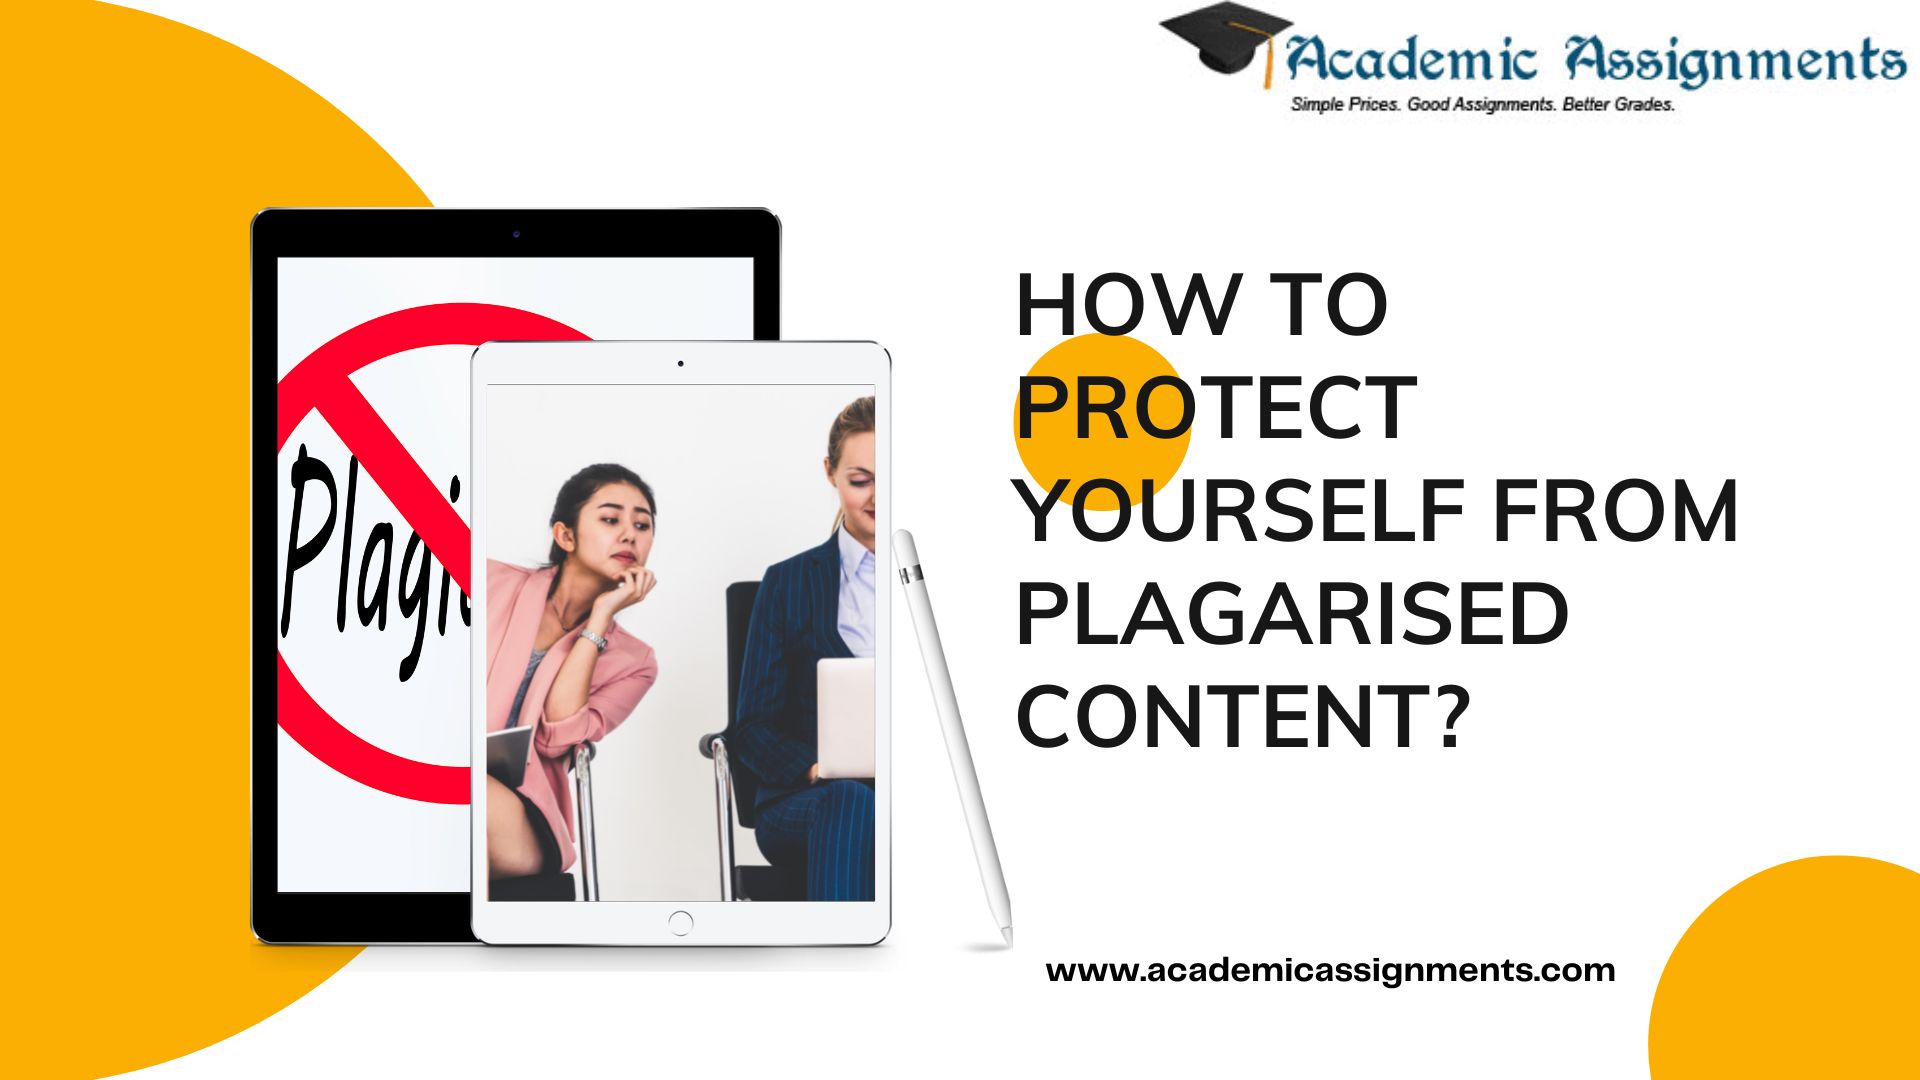 HOW TO PROTECT YOURSELF FROM PLAGARISED CONTENT